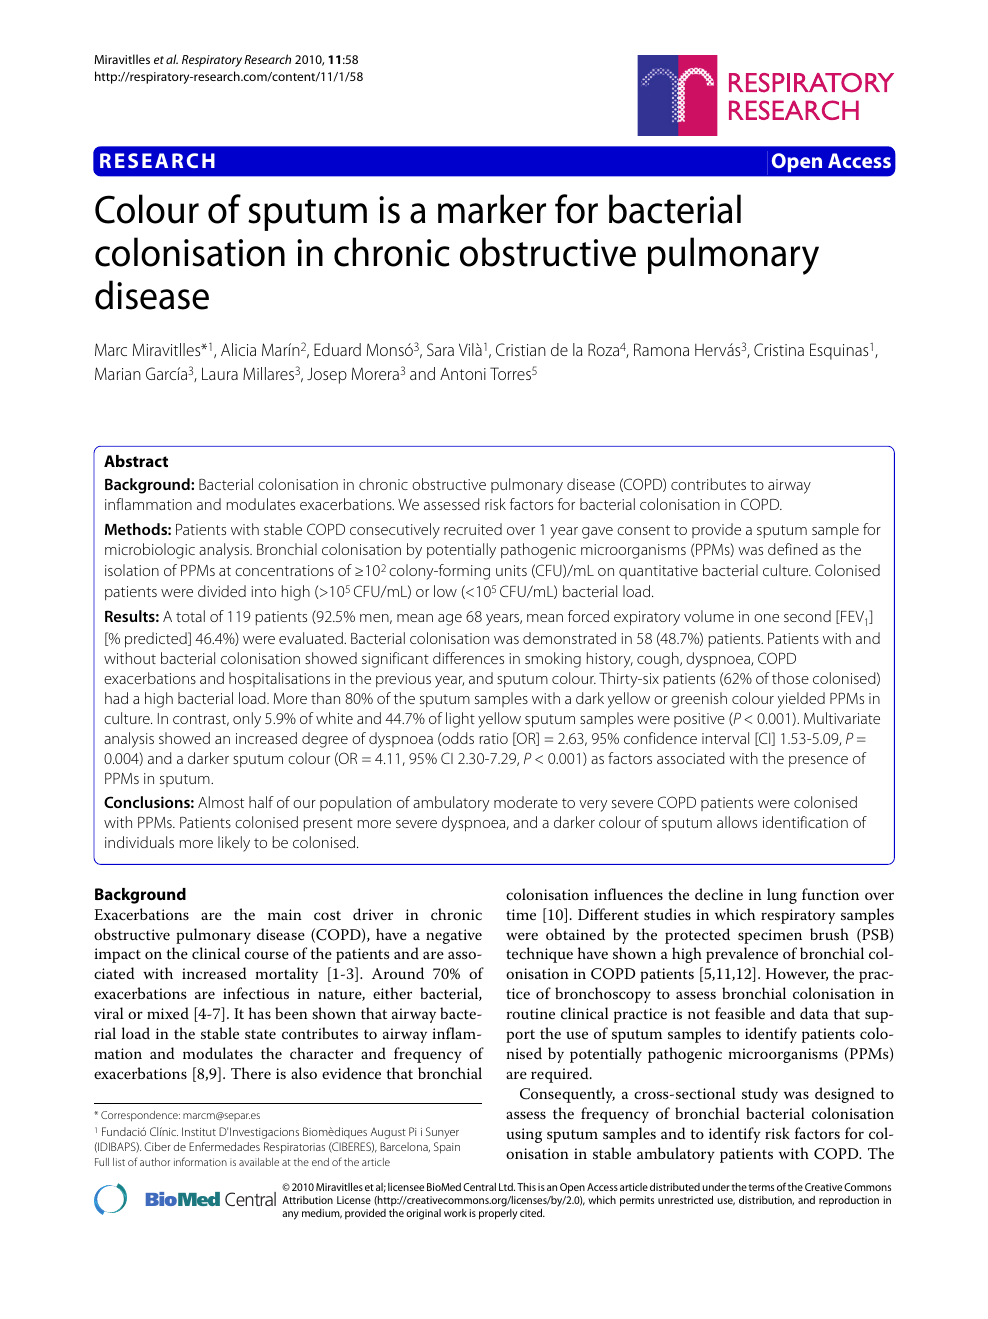 different colors of sputum